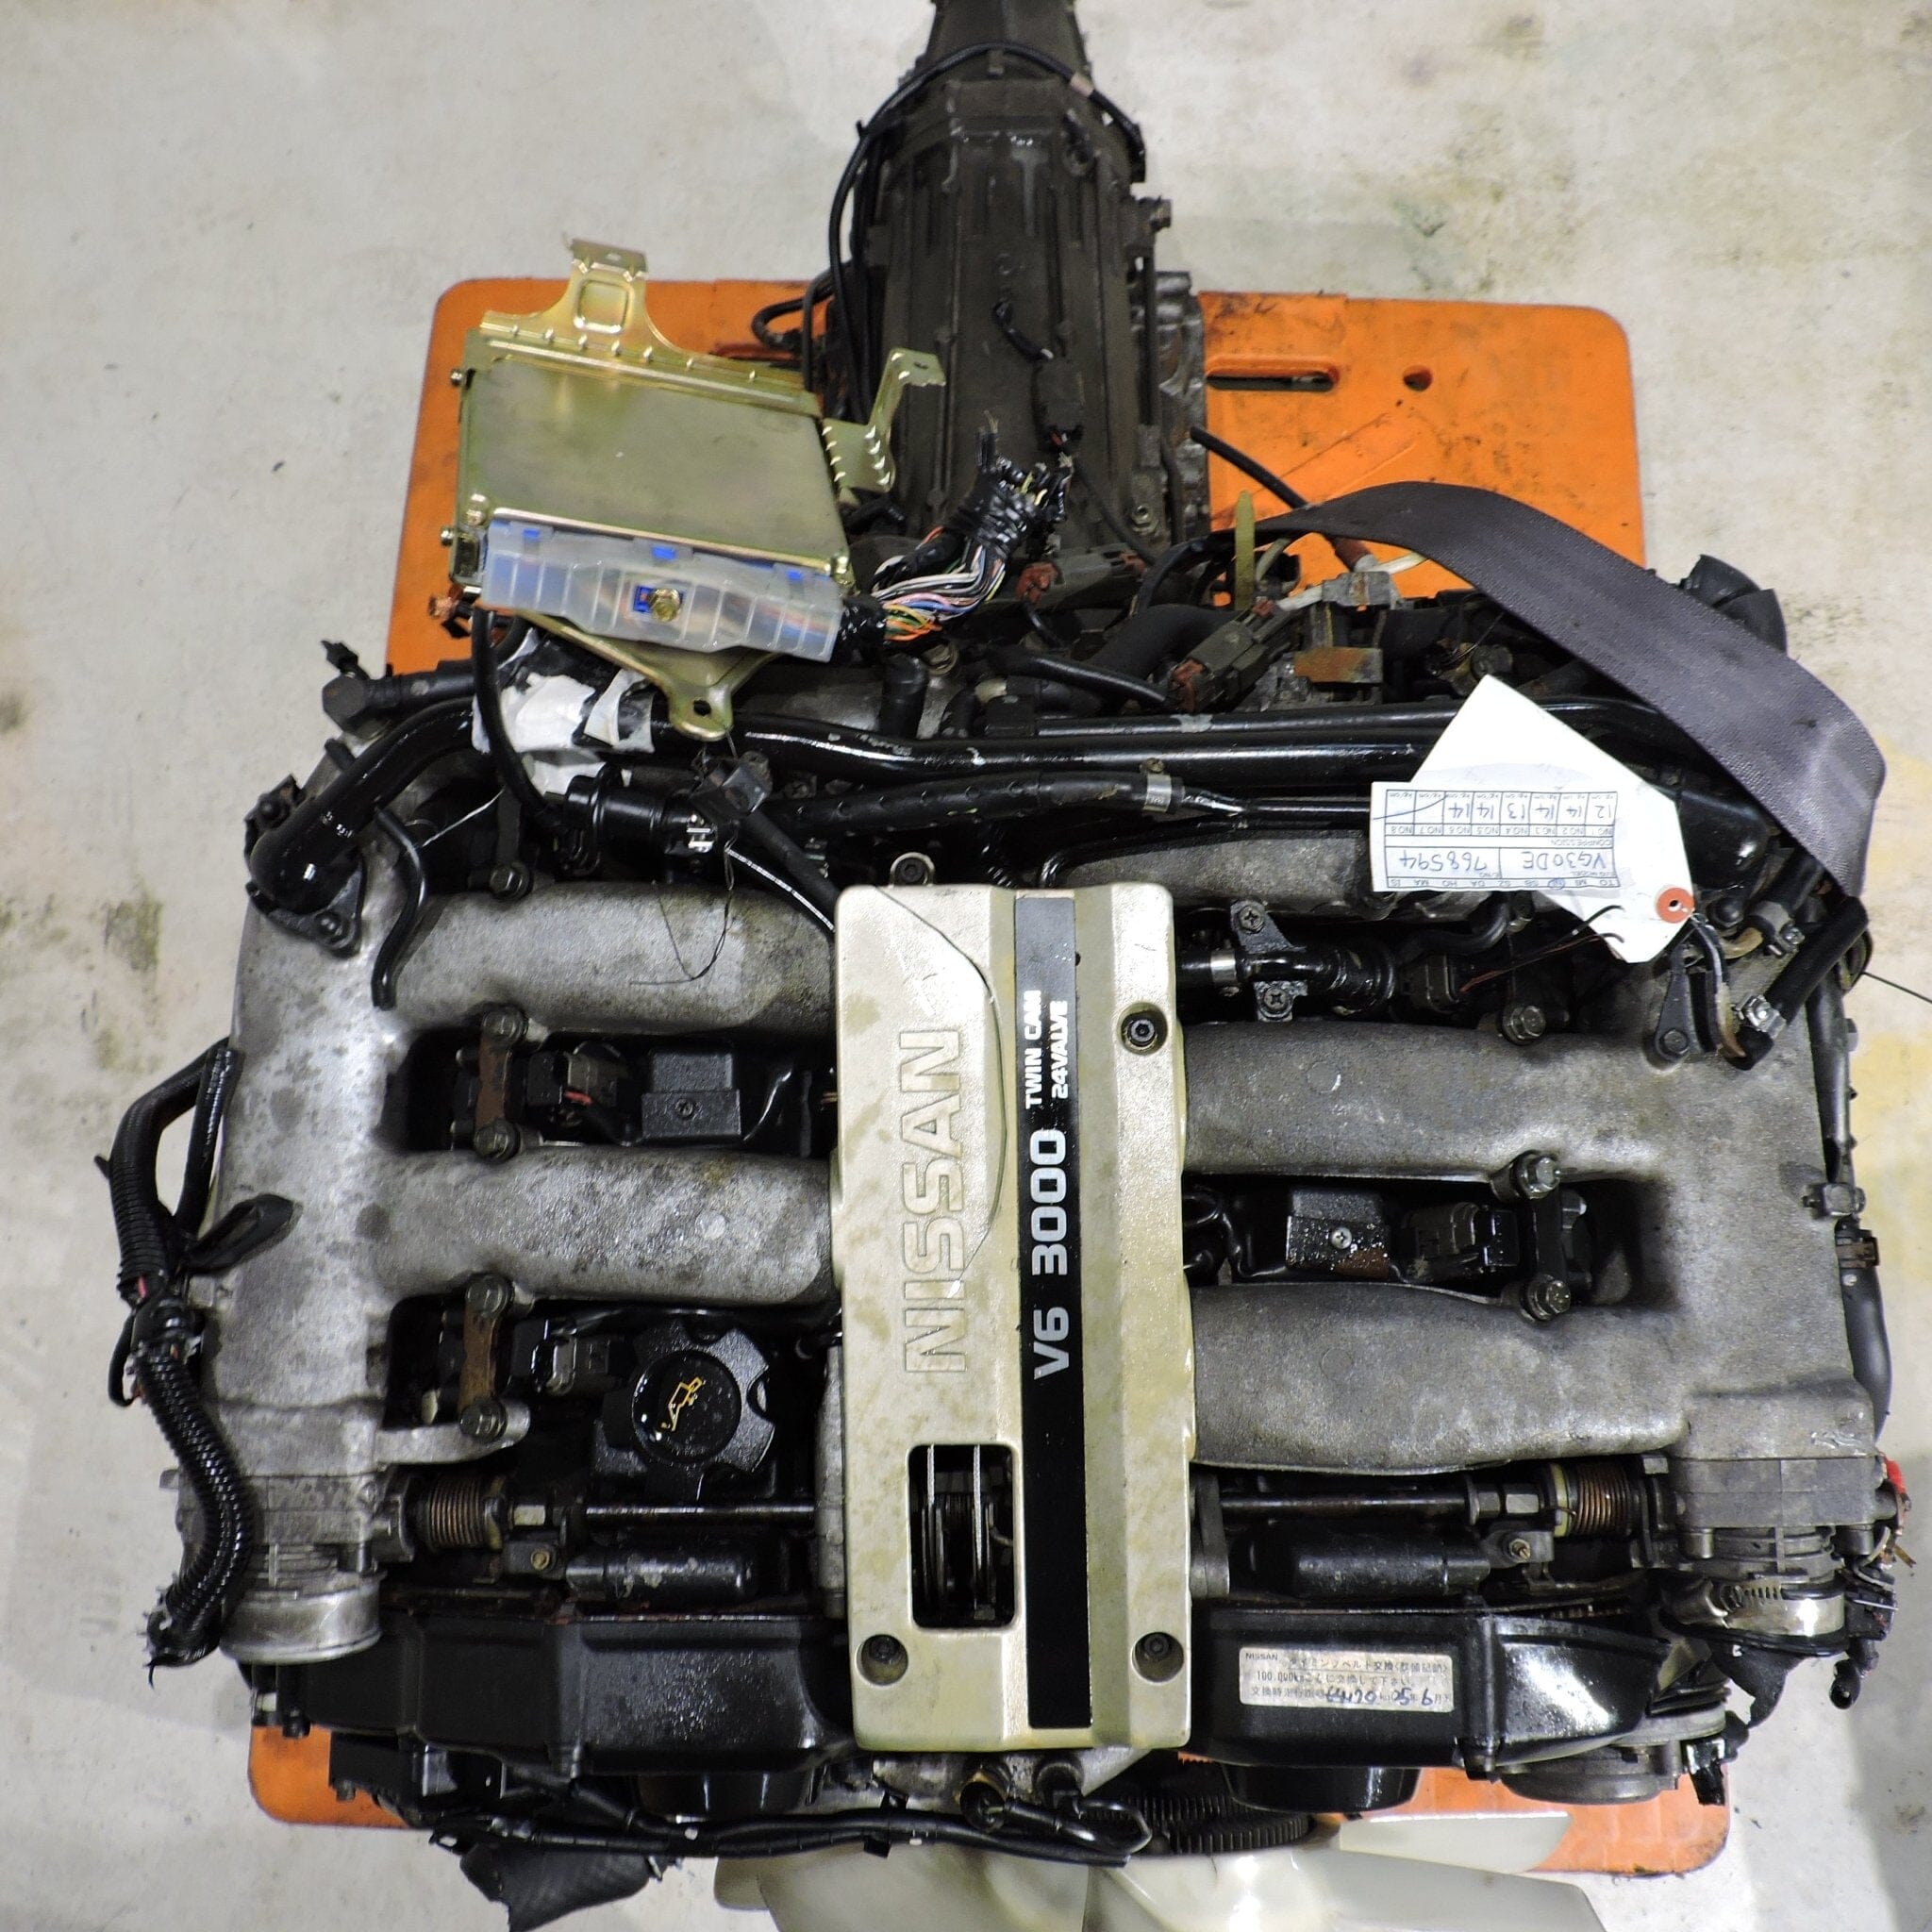 Nissan 300ZX 1990-1995 3.0L Non Turbo Jdm Engine And Automatic Transmission - VG30DE